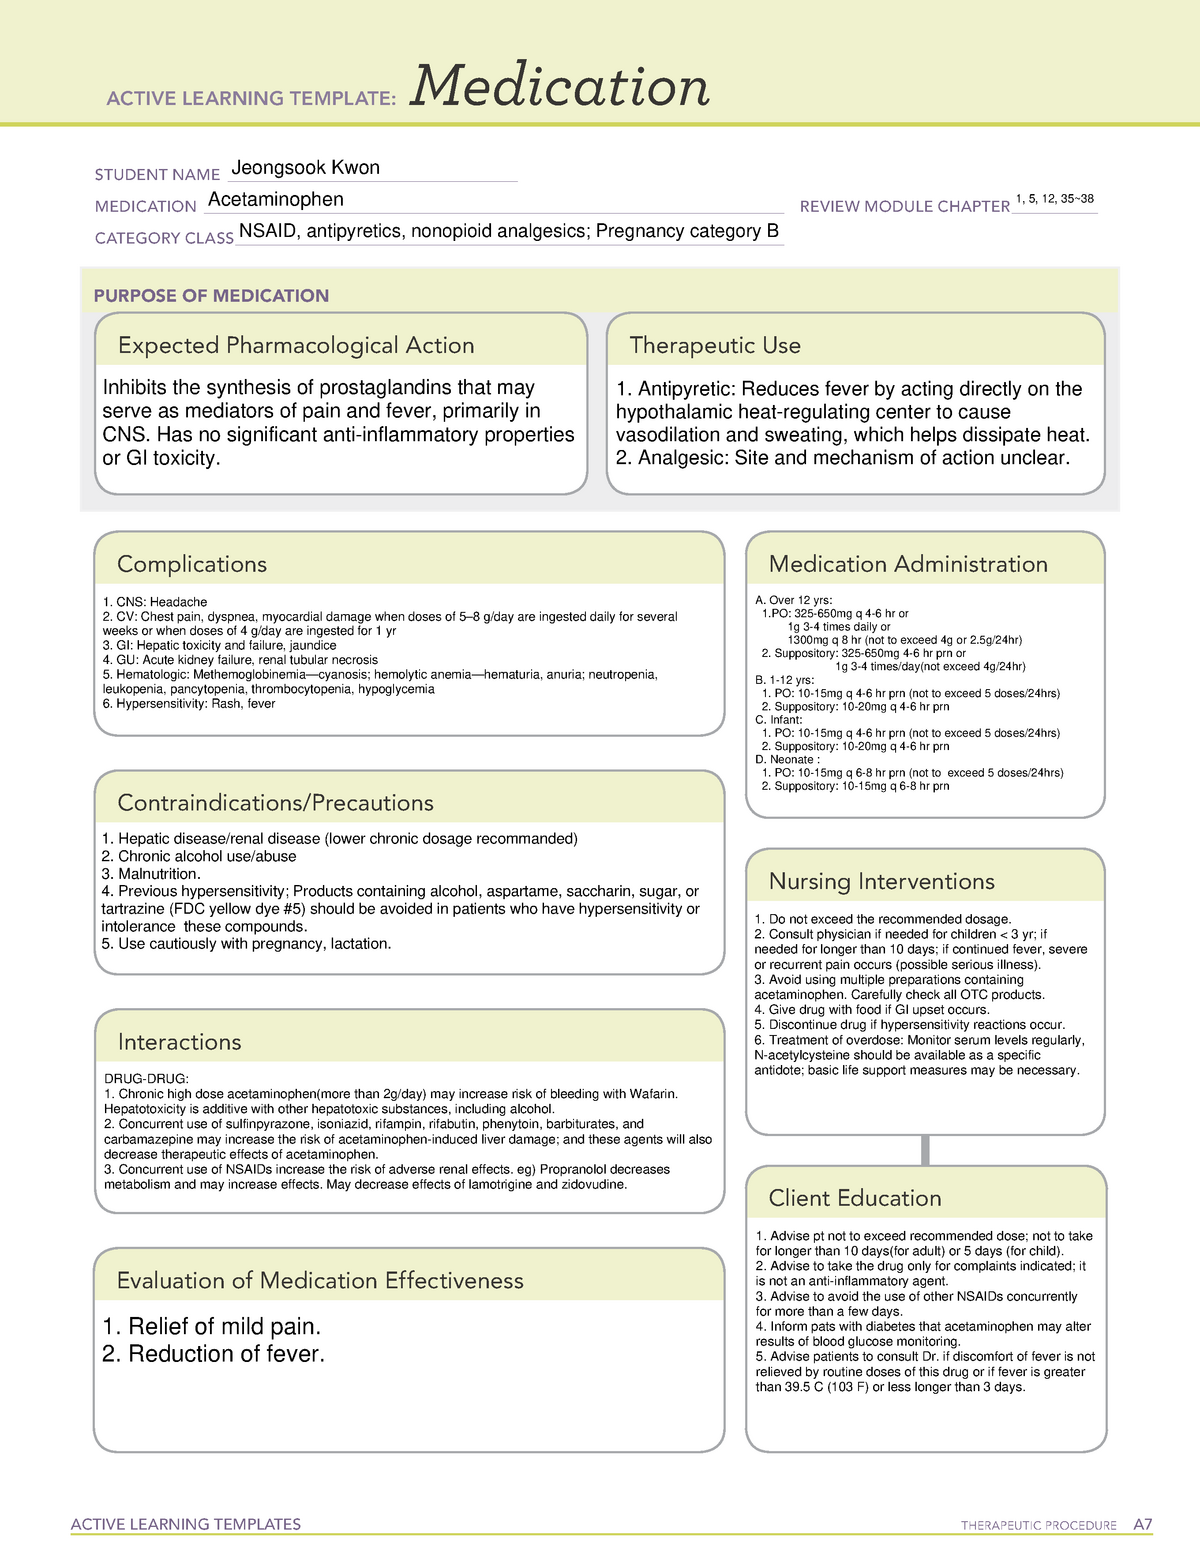 Acetaminophen Drug Card ATI ACTIVE LEARNING TEMPLATES THERAPEUTIC